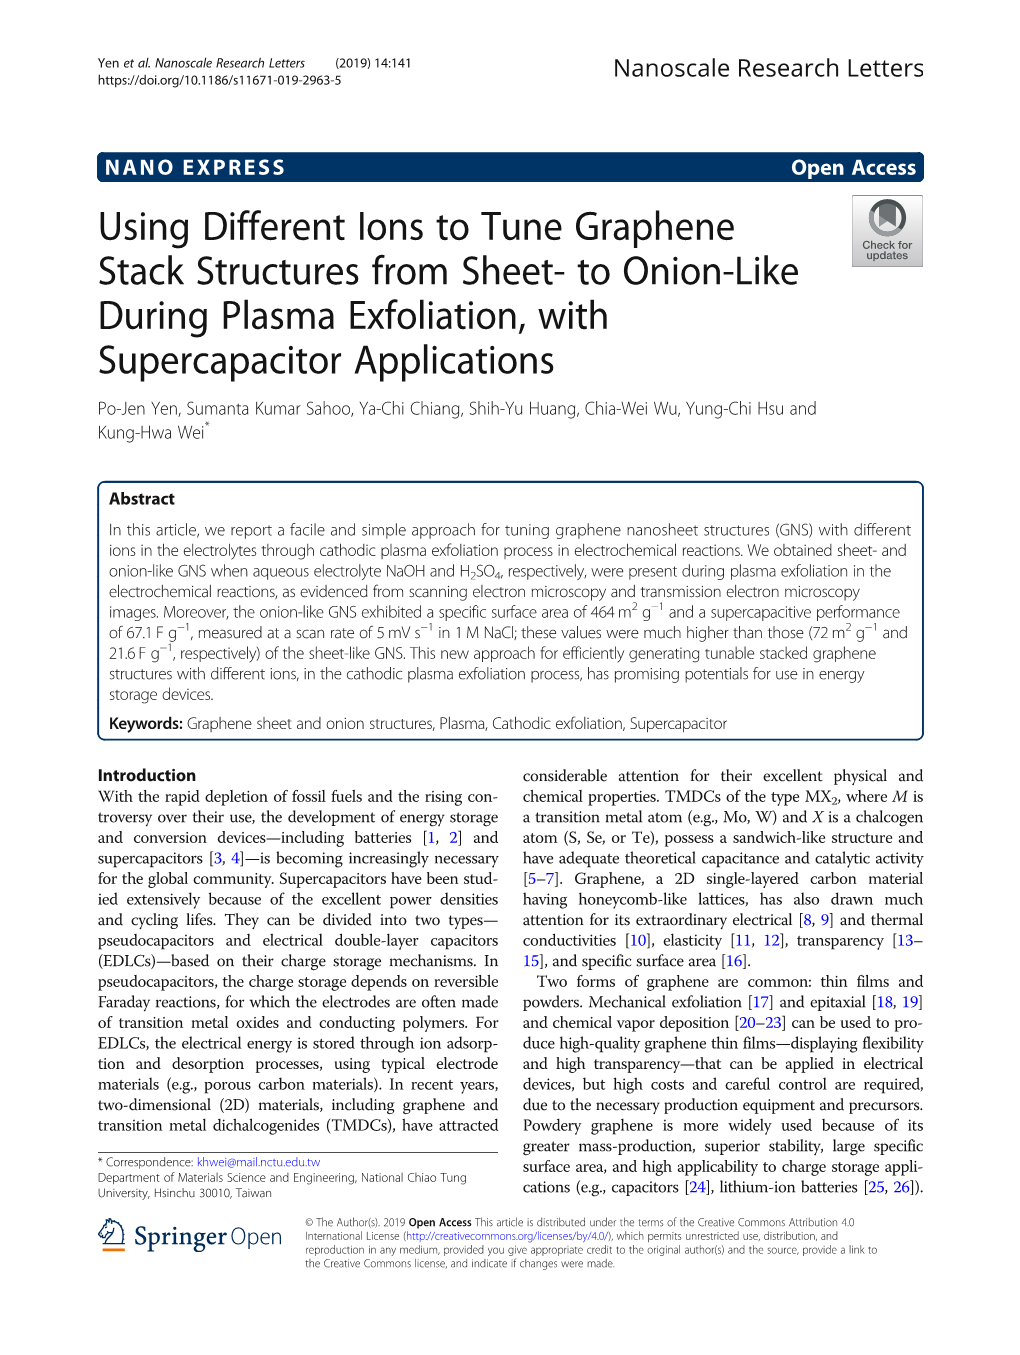 Using Different Ions to Tune Graphene Stack Structures from Sheet